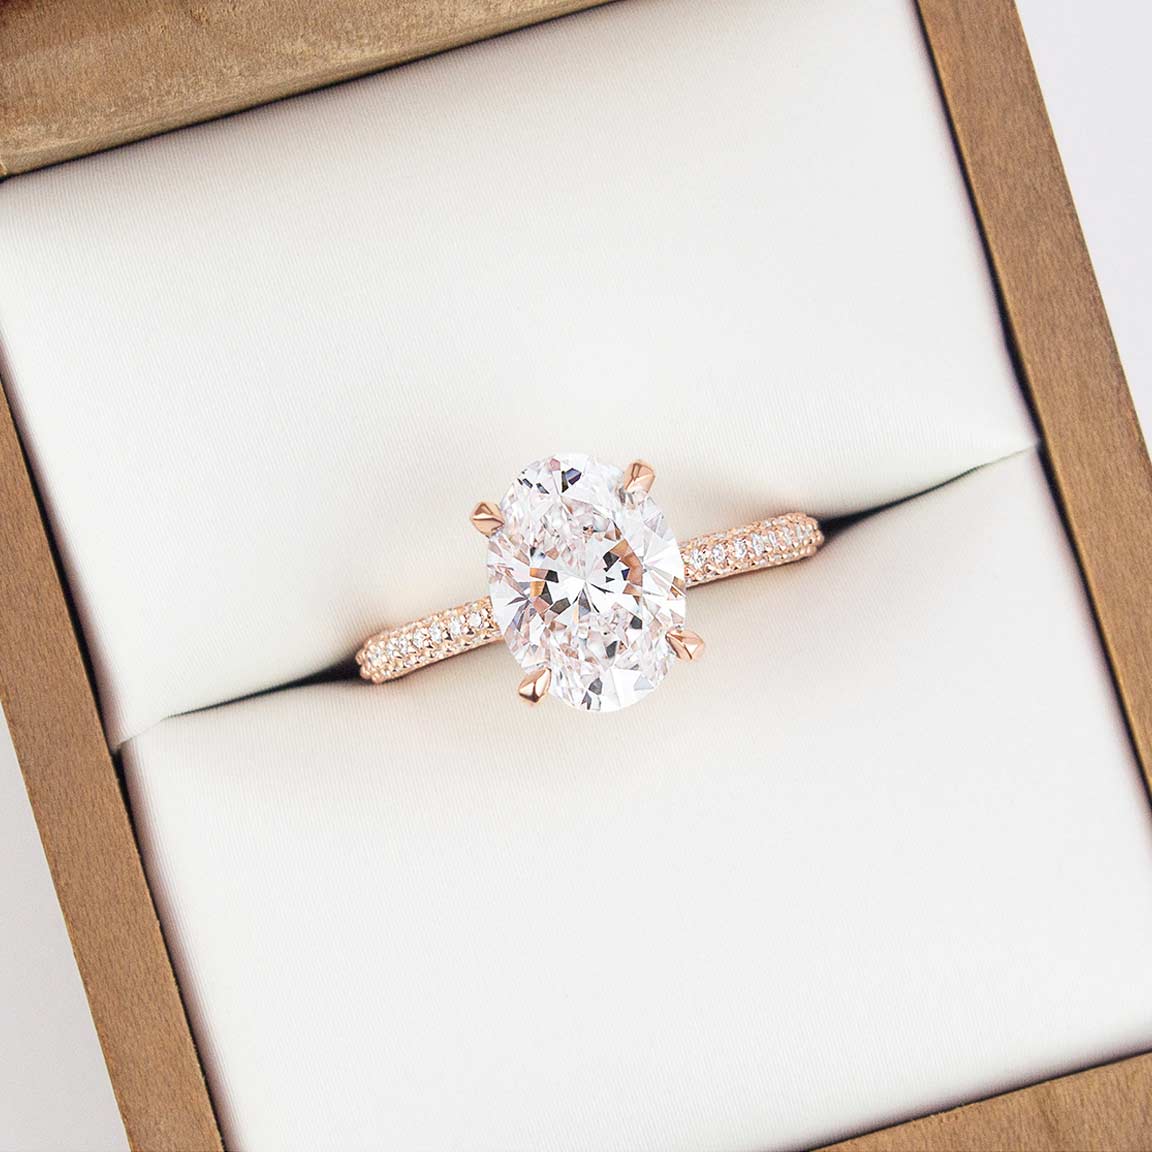 Create your own diamond engagement ring